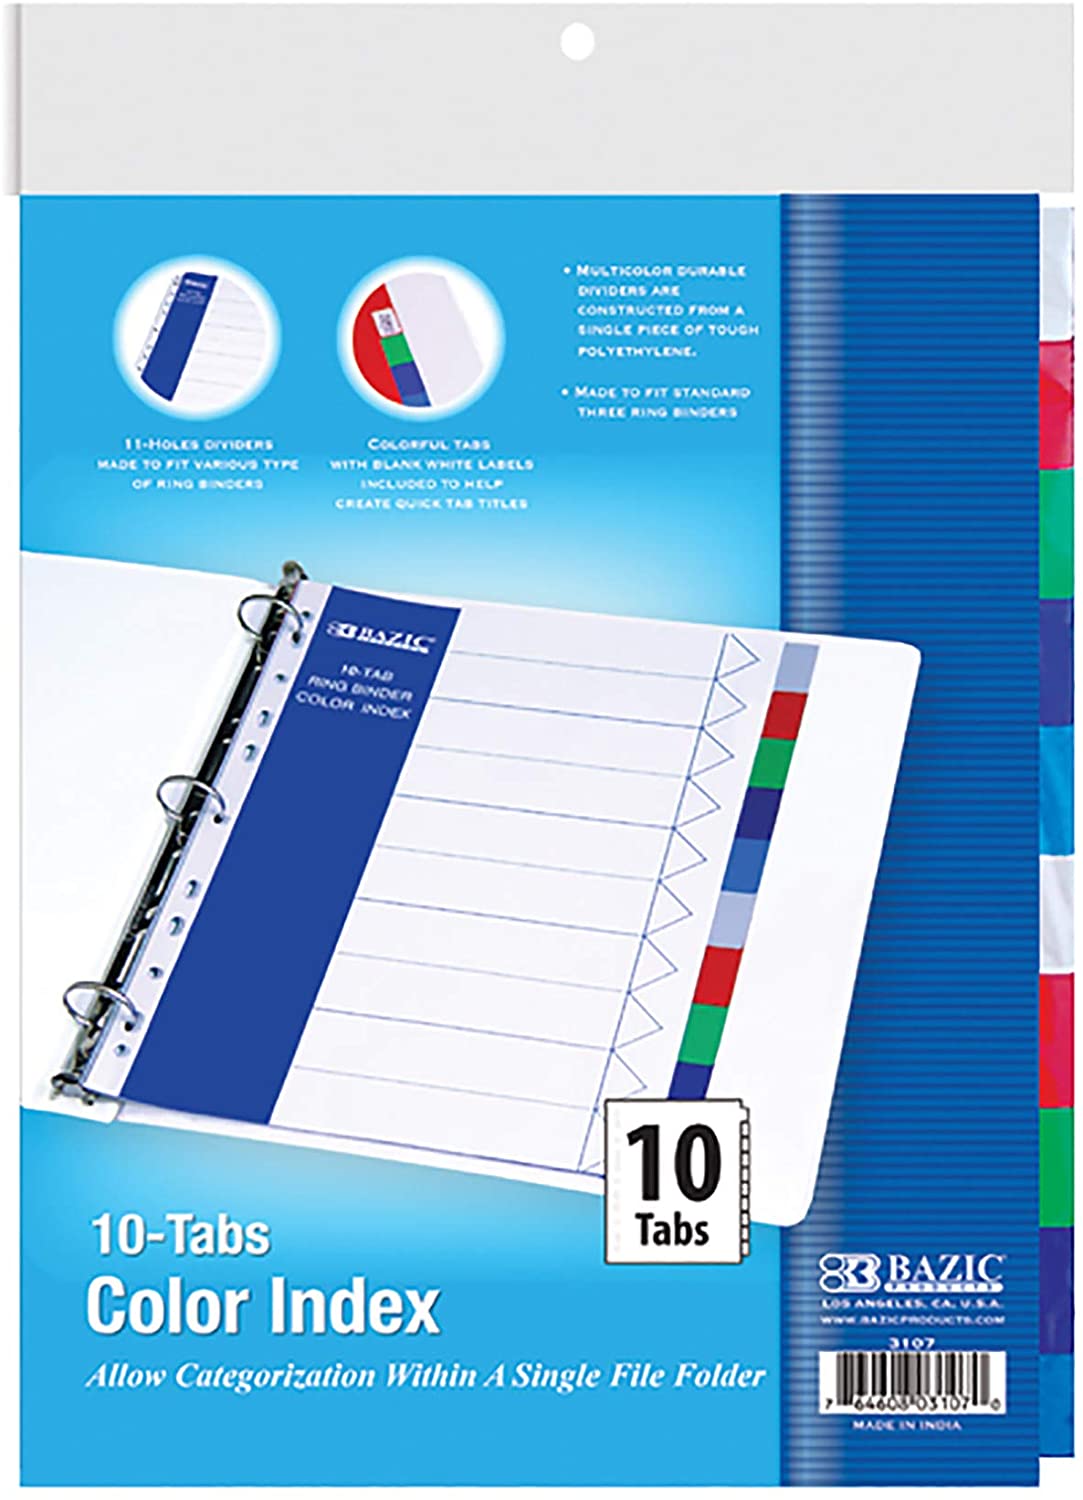 BAZIC 3-Ring Binder Dividers w/ 5-Insertable Color Tabs, 1-Pack.